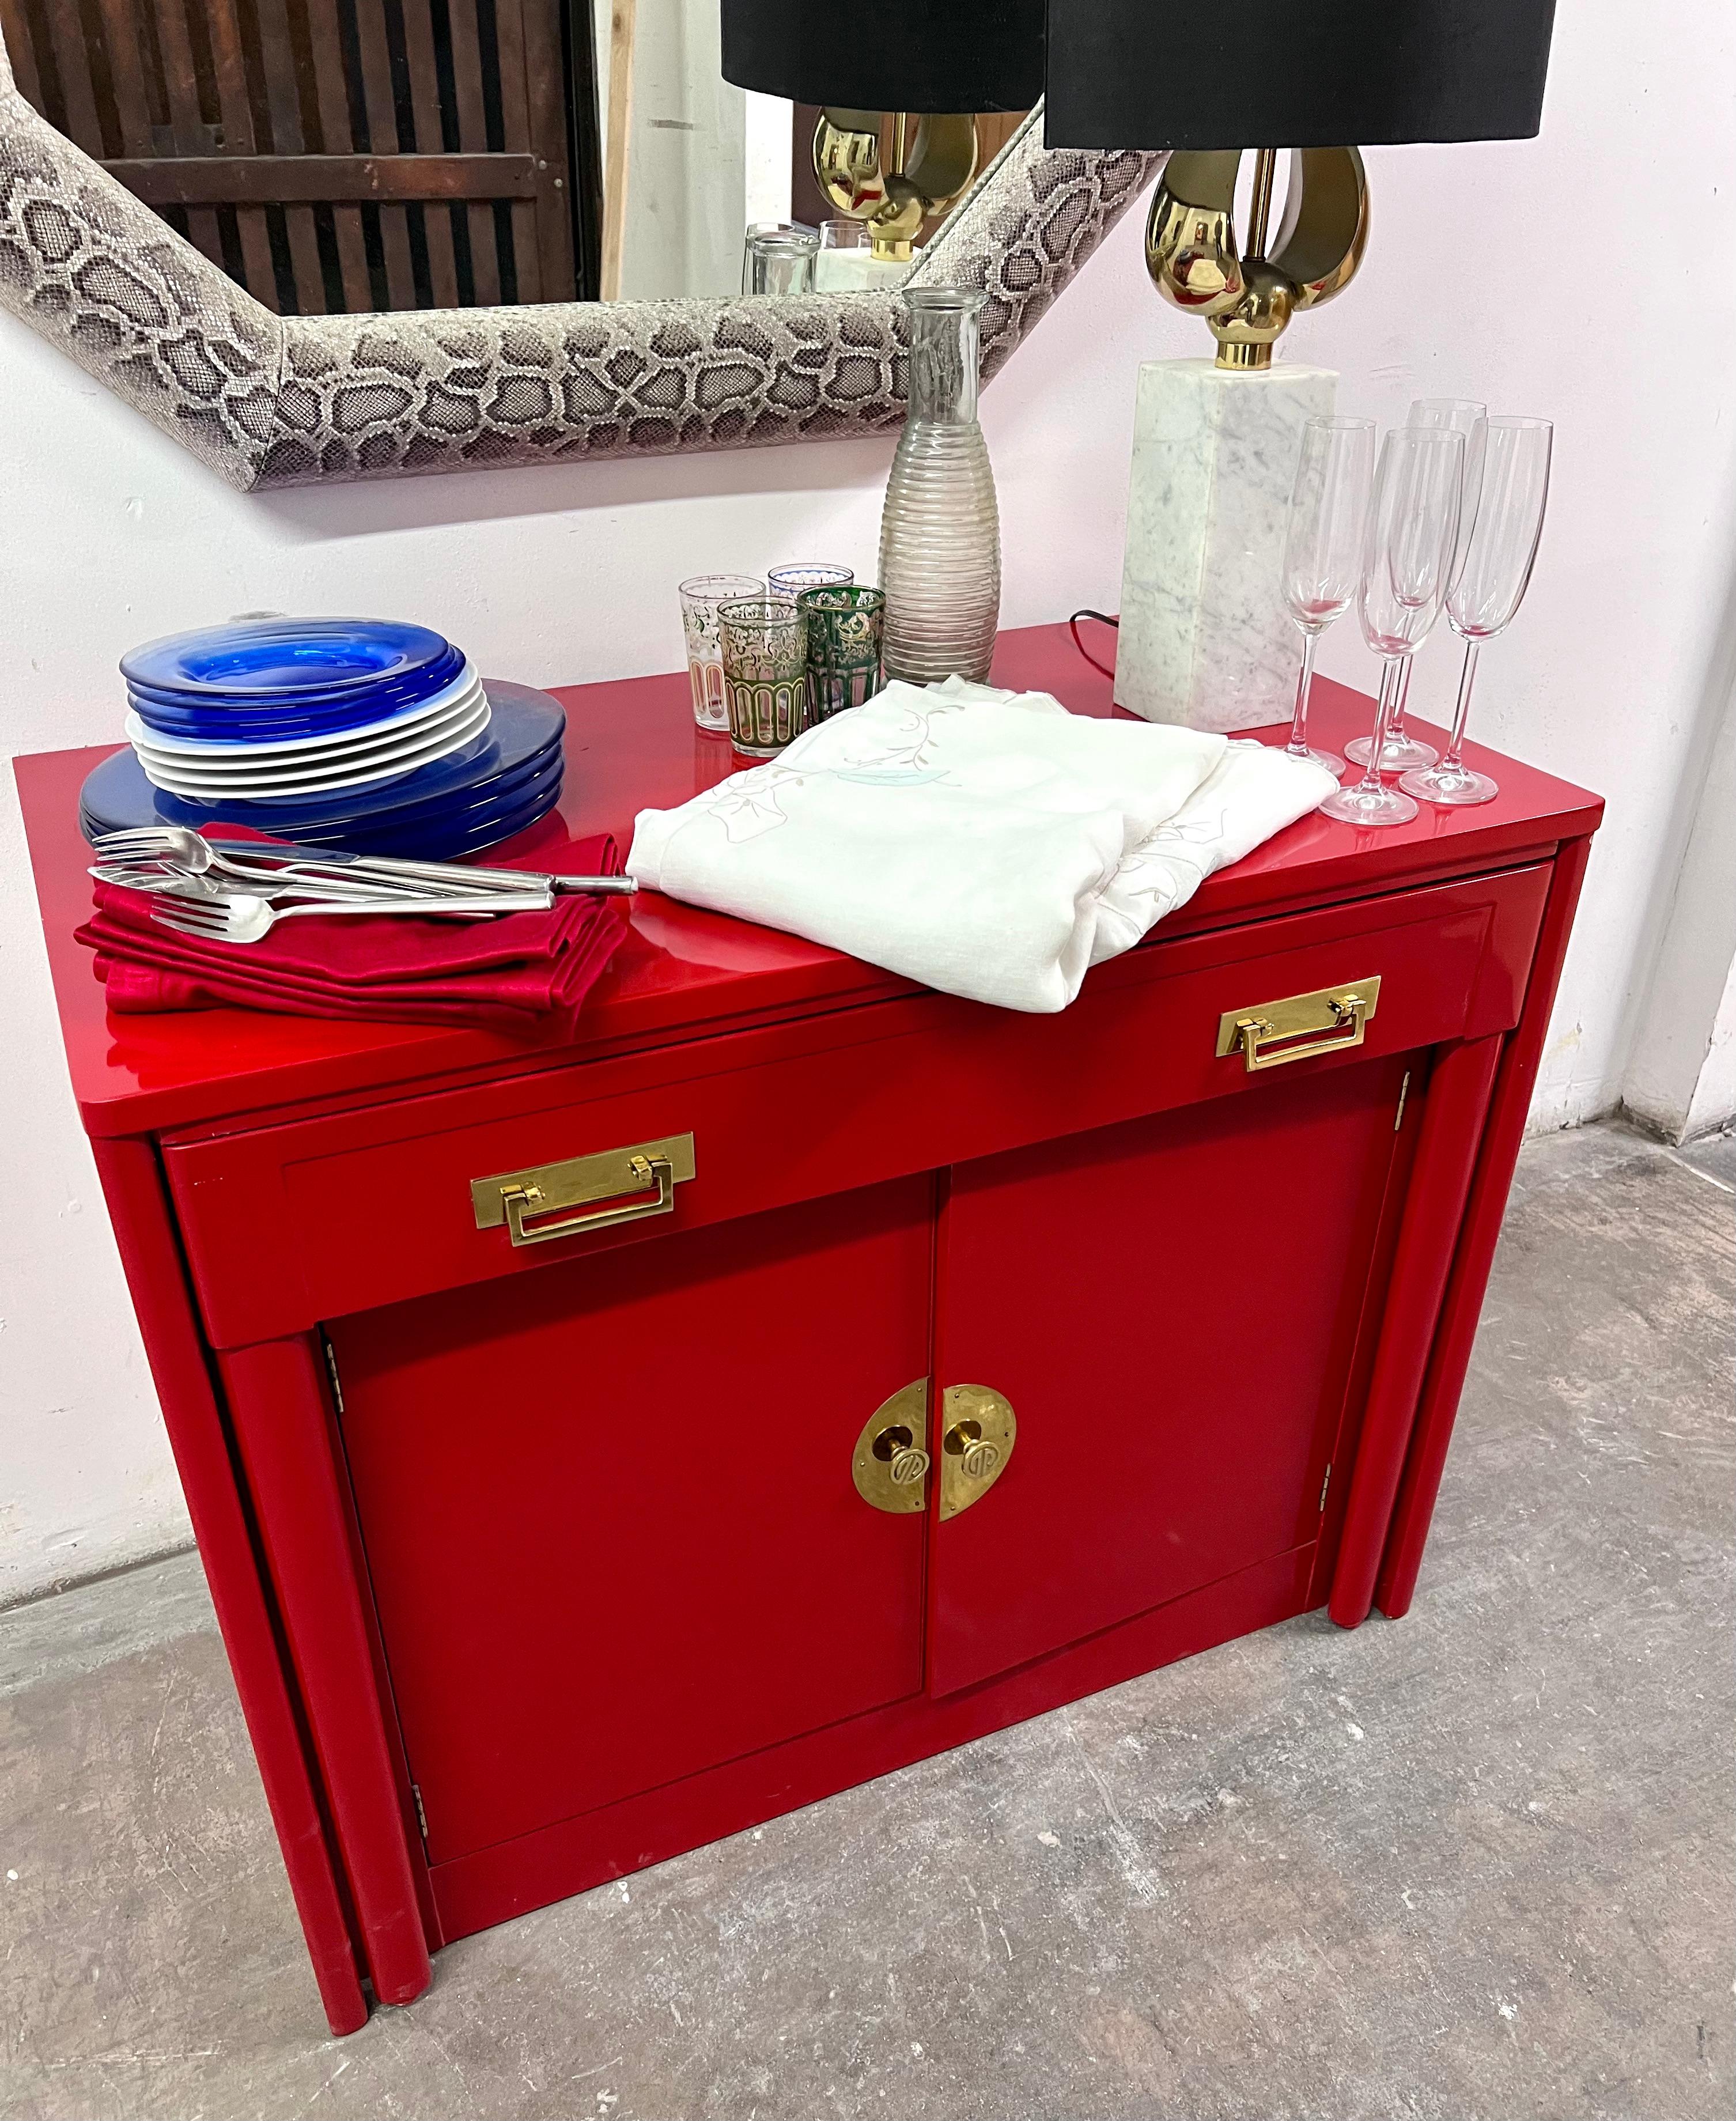 Red Lacquer Chinoiserie Inspired Cabinet that Transforms into a Dining Table For Sale 4